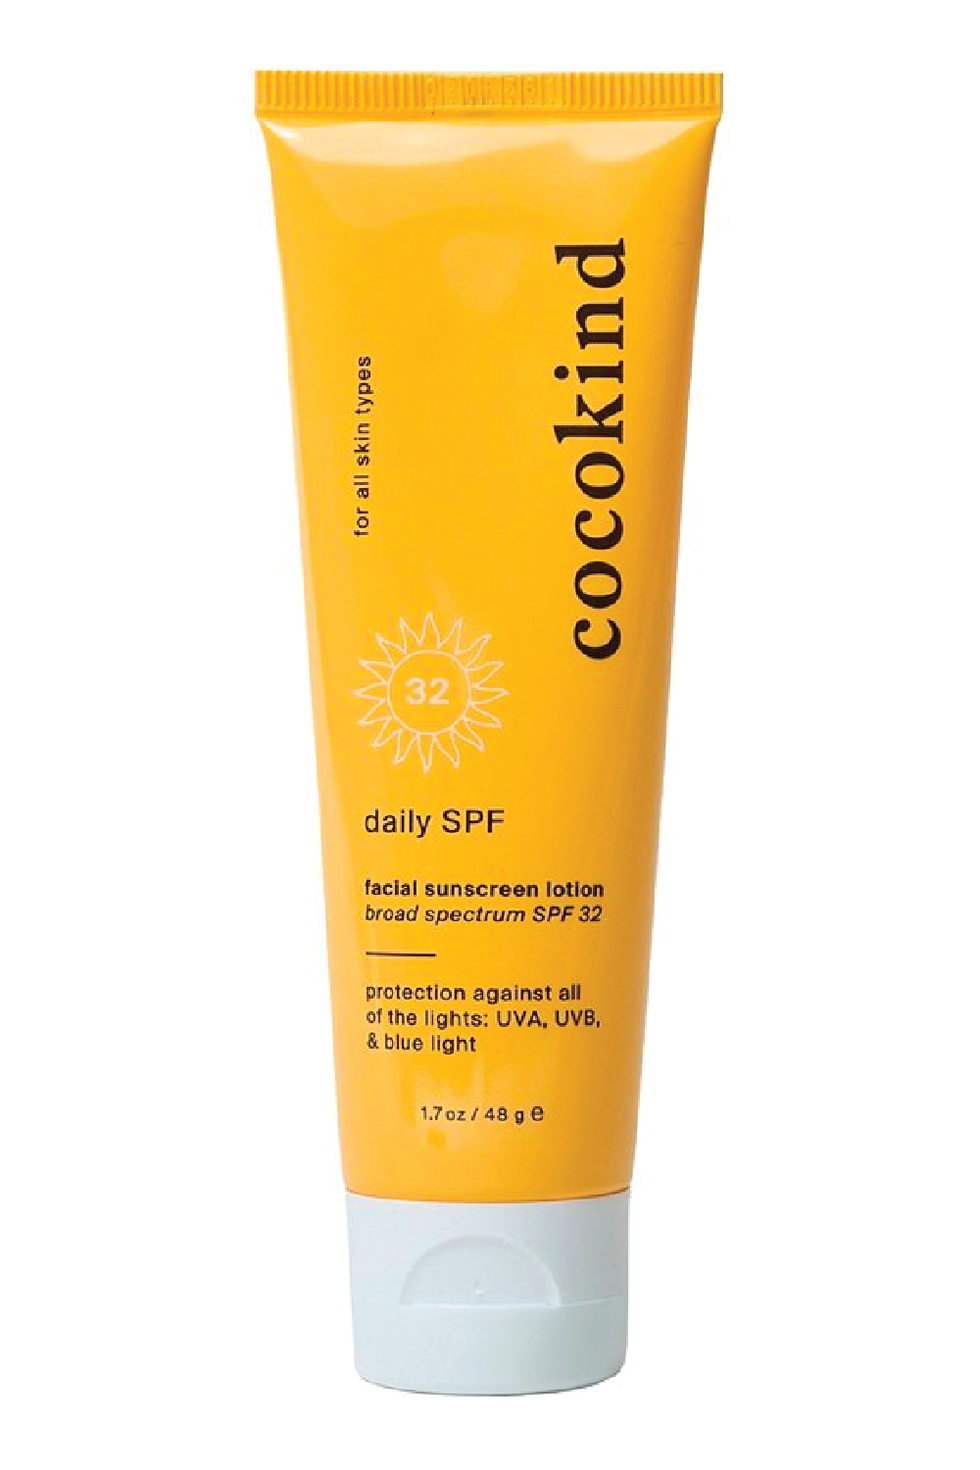 Cocokind Daily Facial Sunscreen Lotion SPF 32